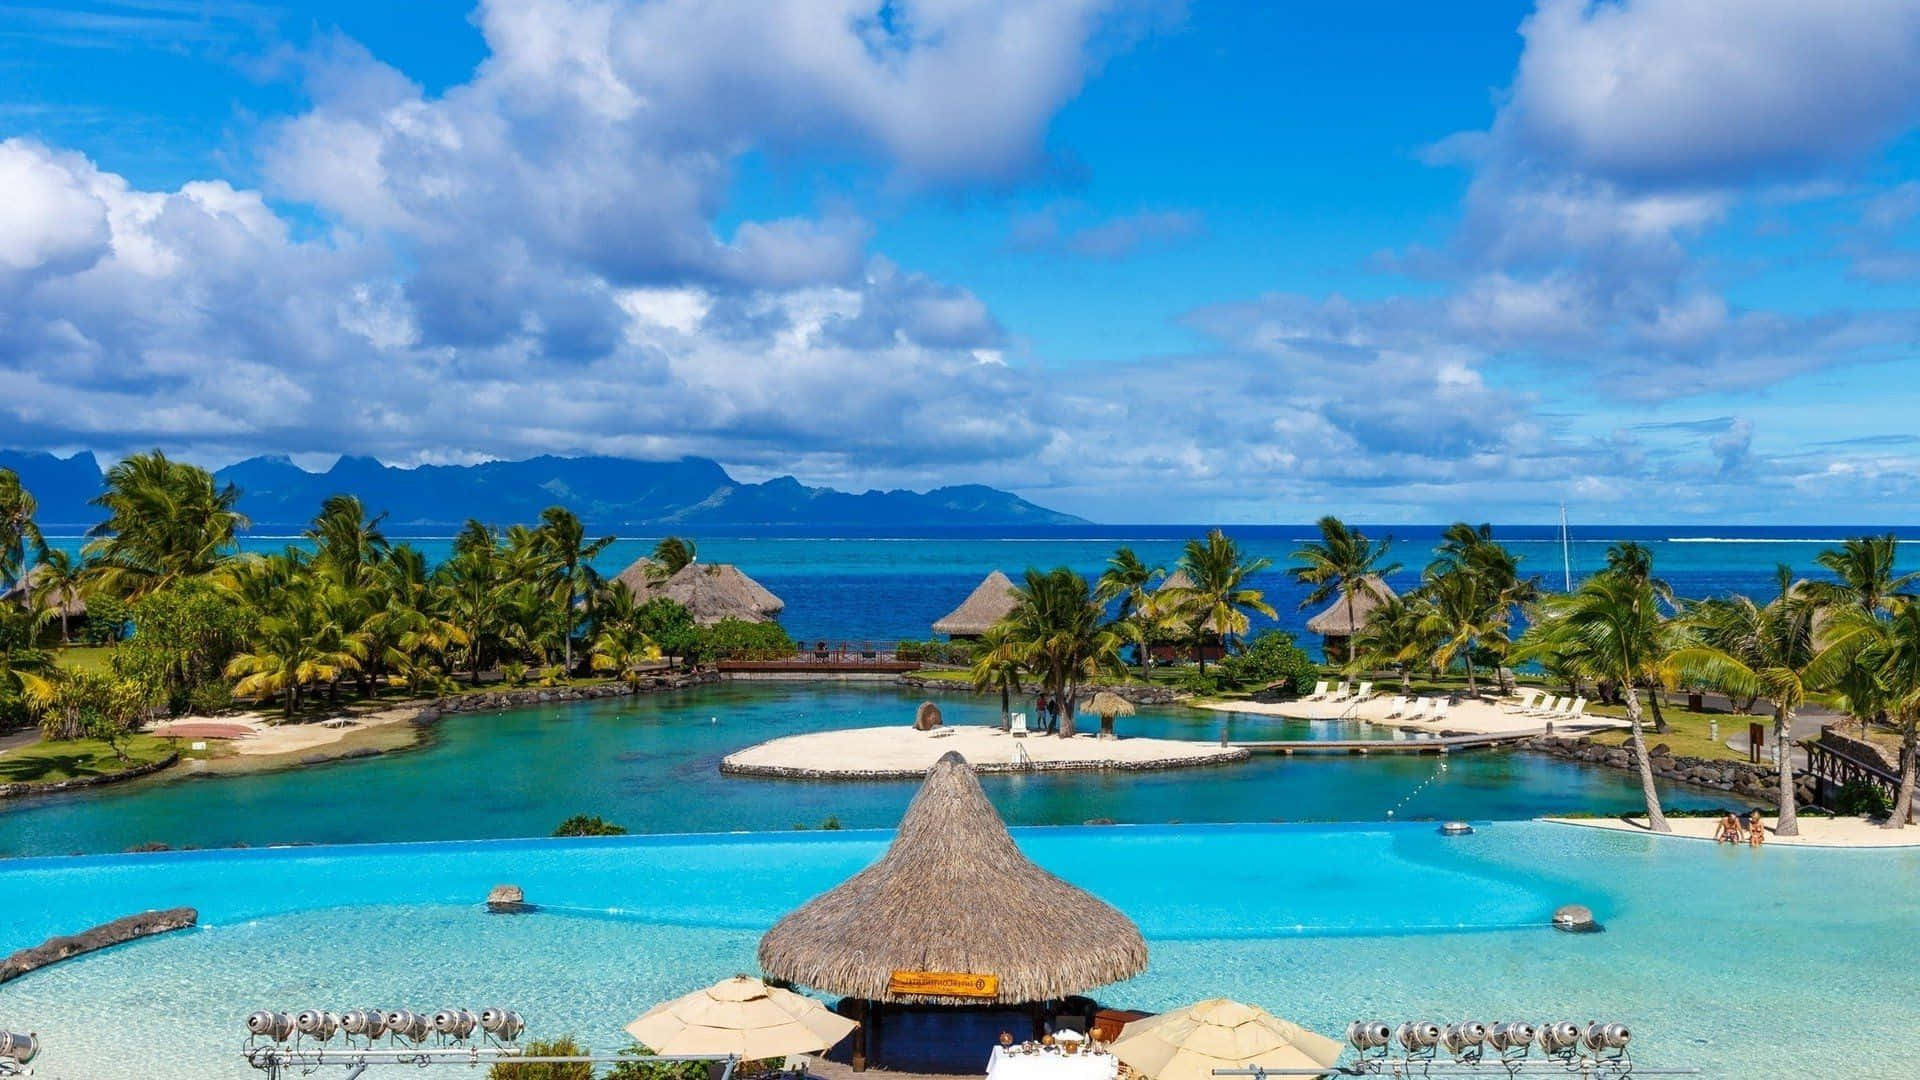 Relaxation at Its Finest: Breathtaking Beach Resort Wallpaper